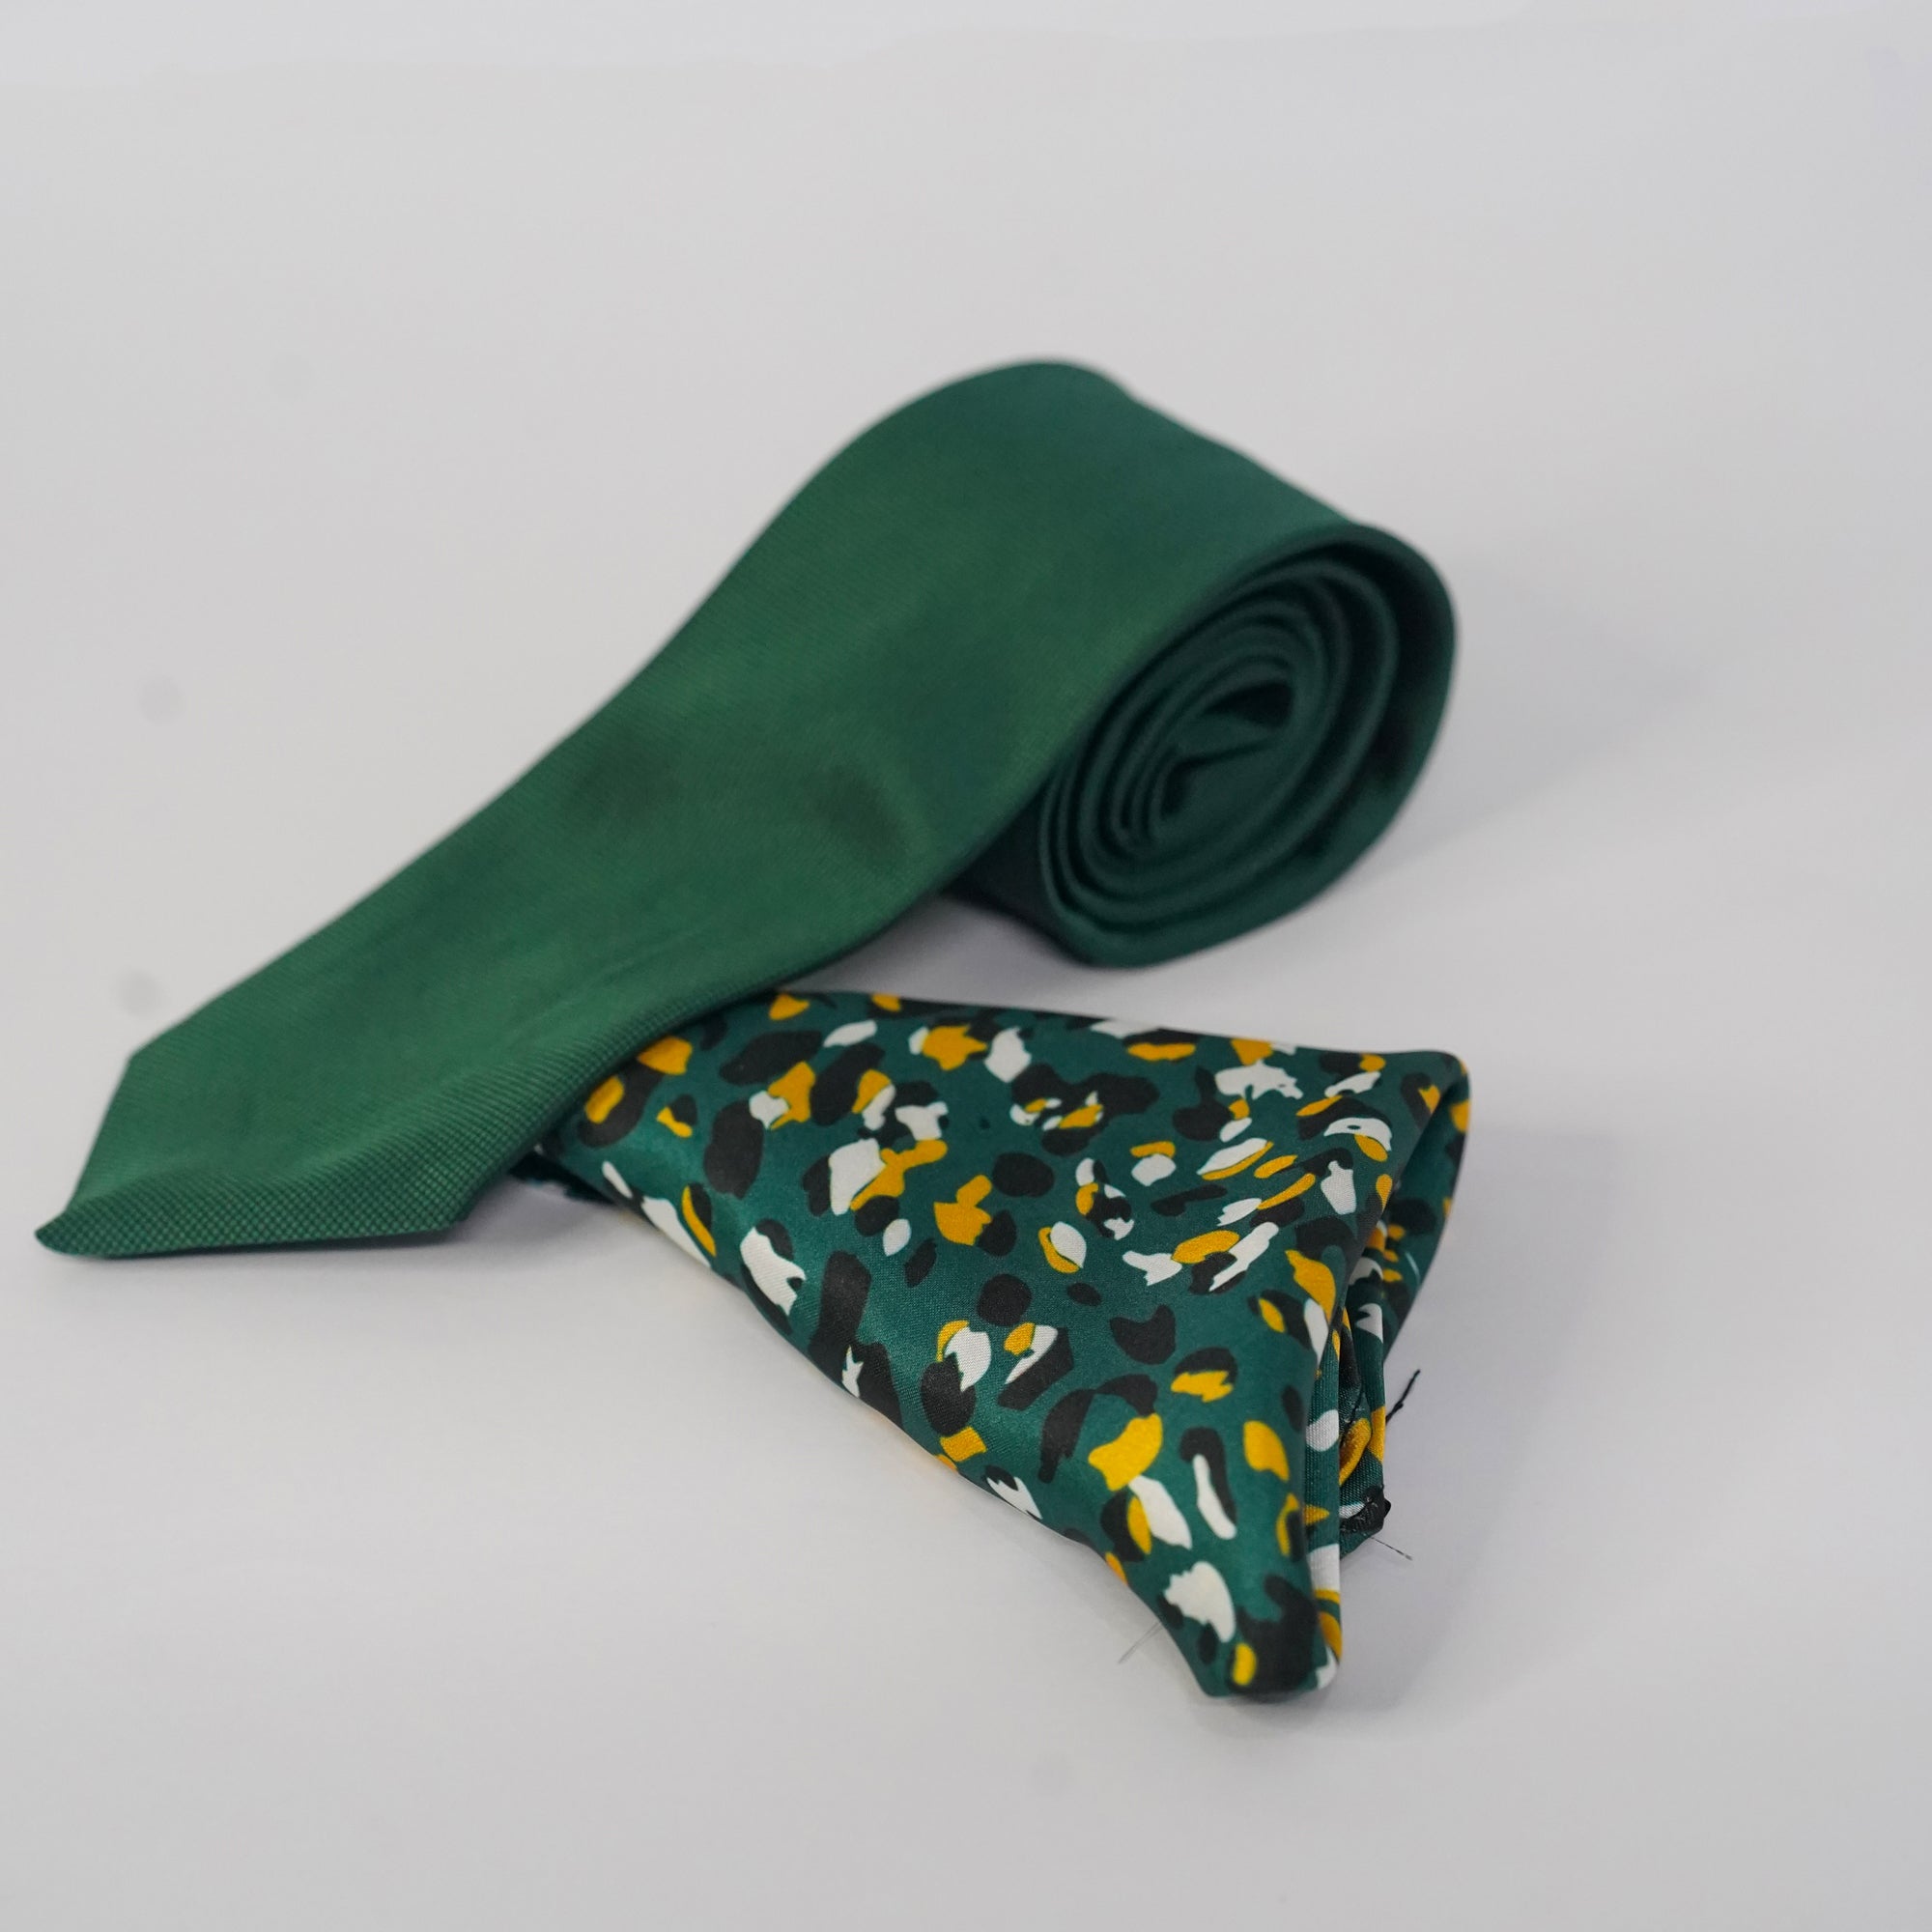 ARMY GREEN POCKET SQUARE AND TIE SET